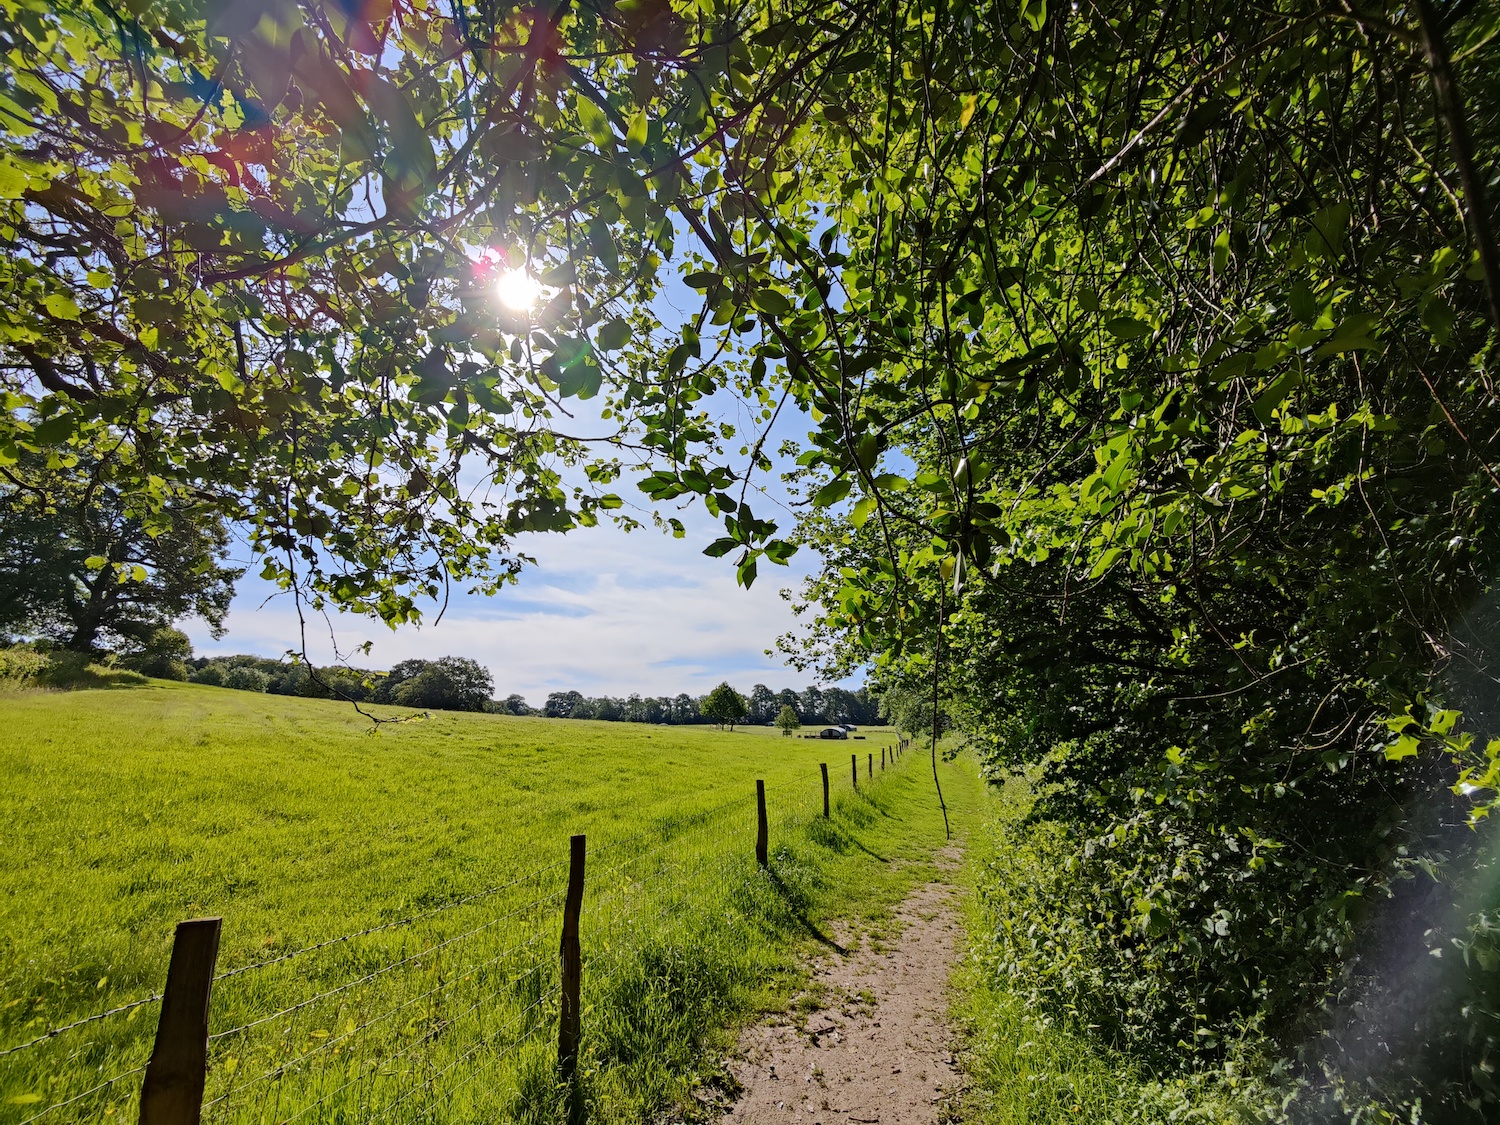 Wide-angle path and field scene photo taken with the OnePlus 9 Pro